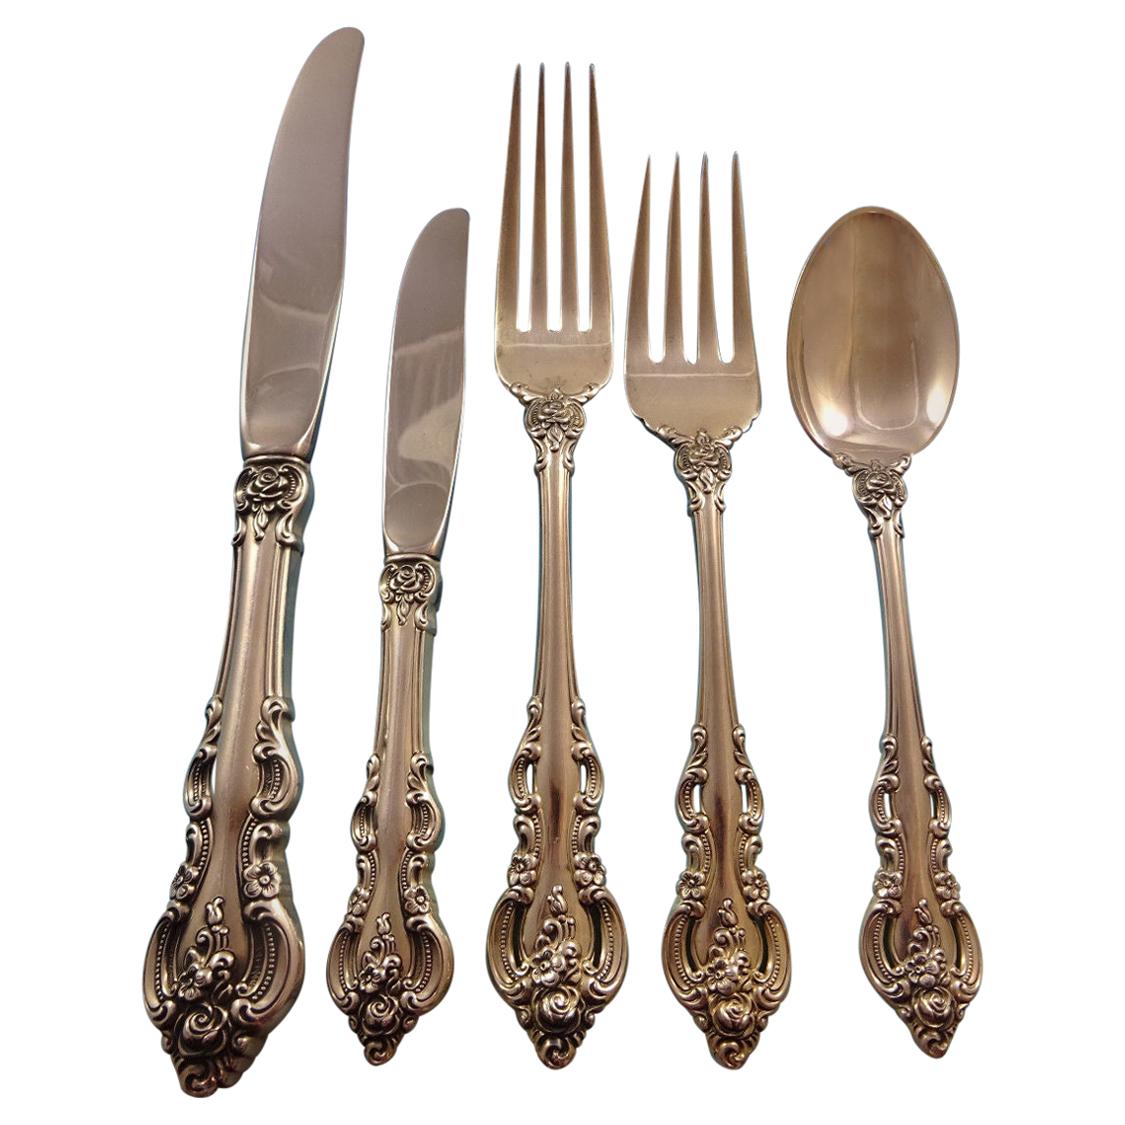 s Contour by Towle Sterling Silver Regular Size Place Setting 4pc 